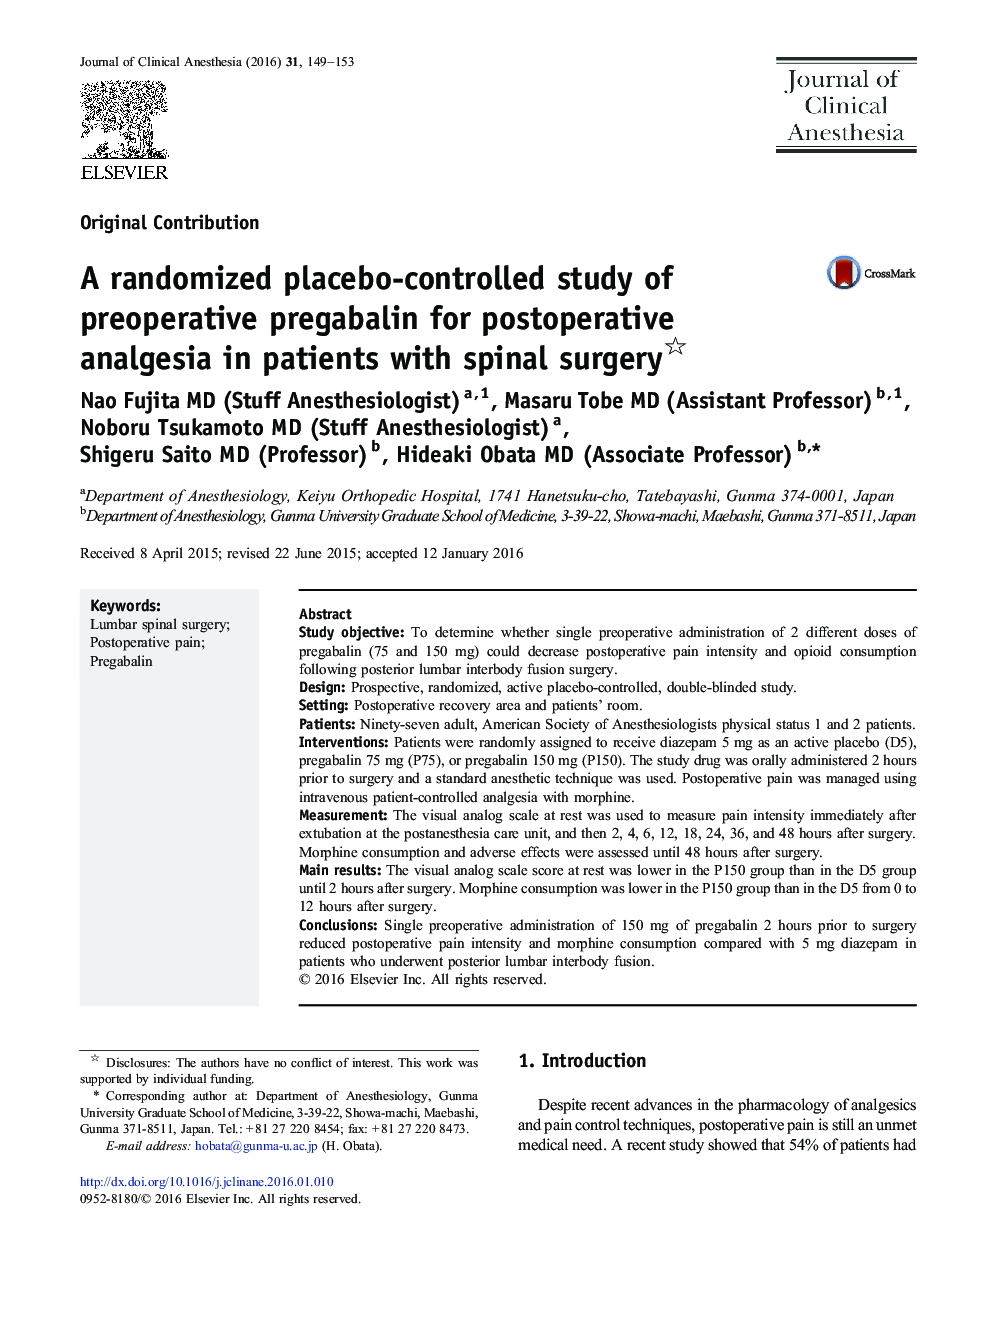 Original ContributionA randomized placebo-controlled study of preoperative pregabalin for postoperative analgesia in patients with spinal surgery